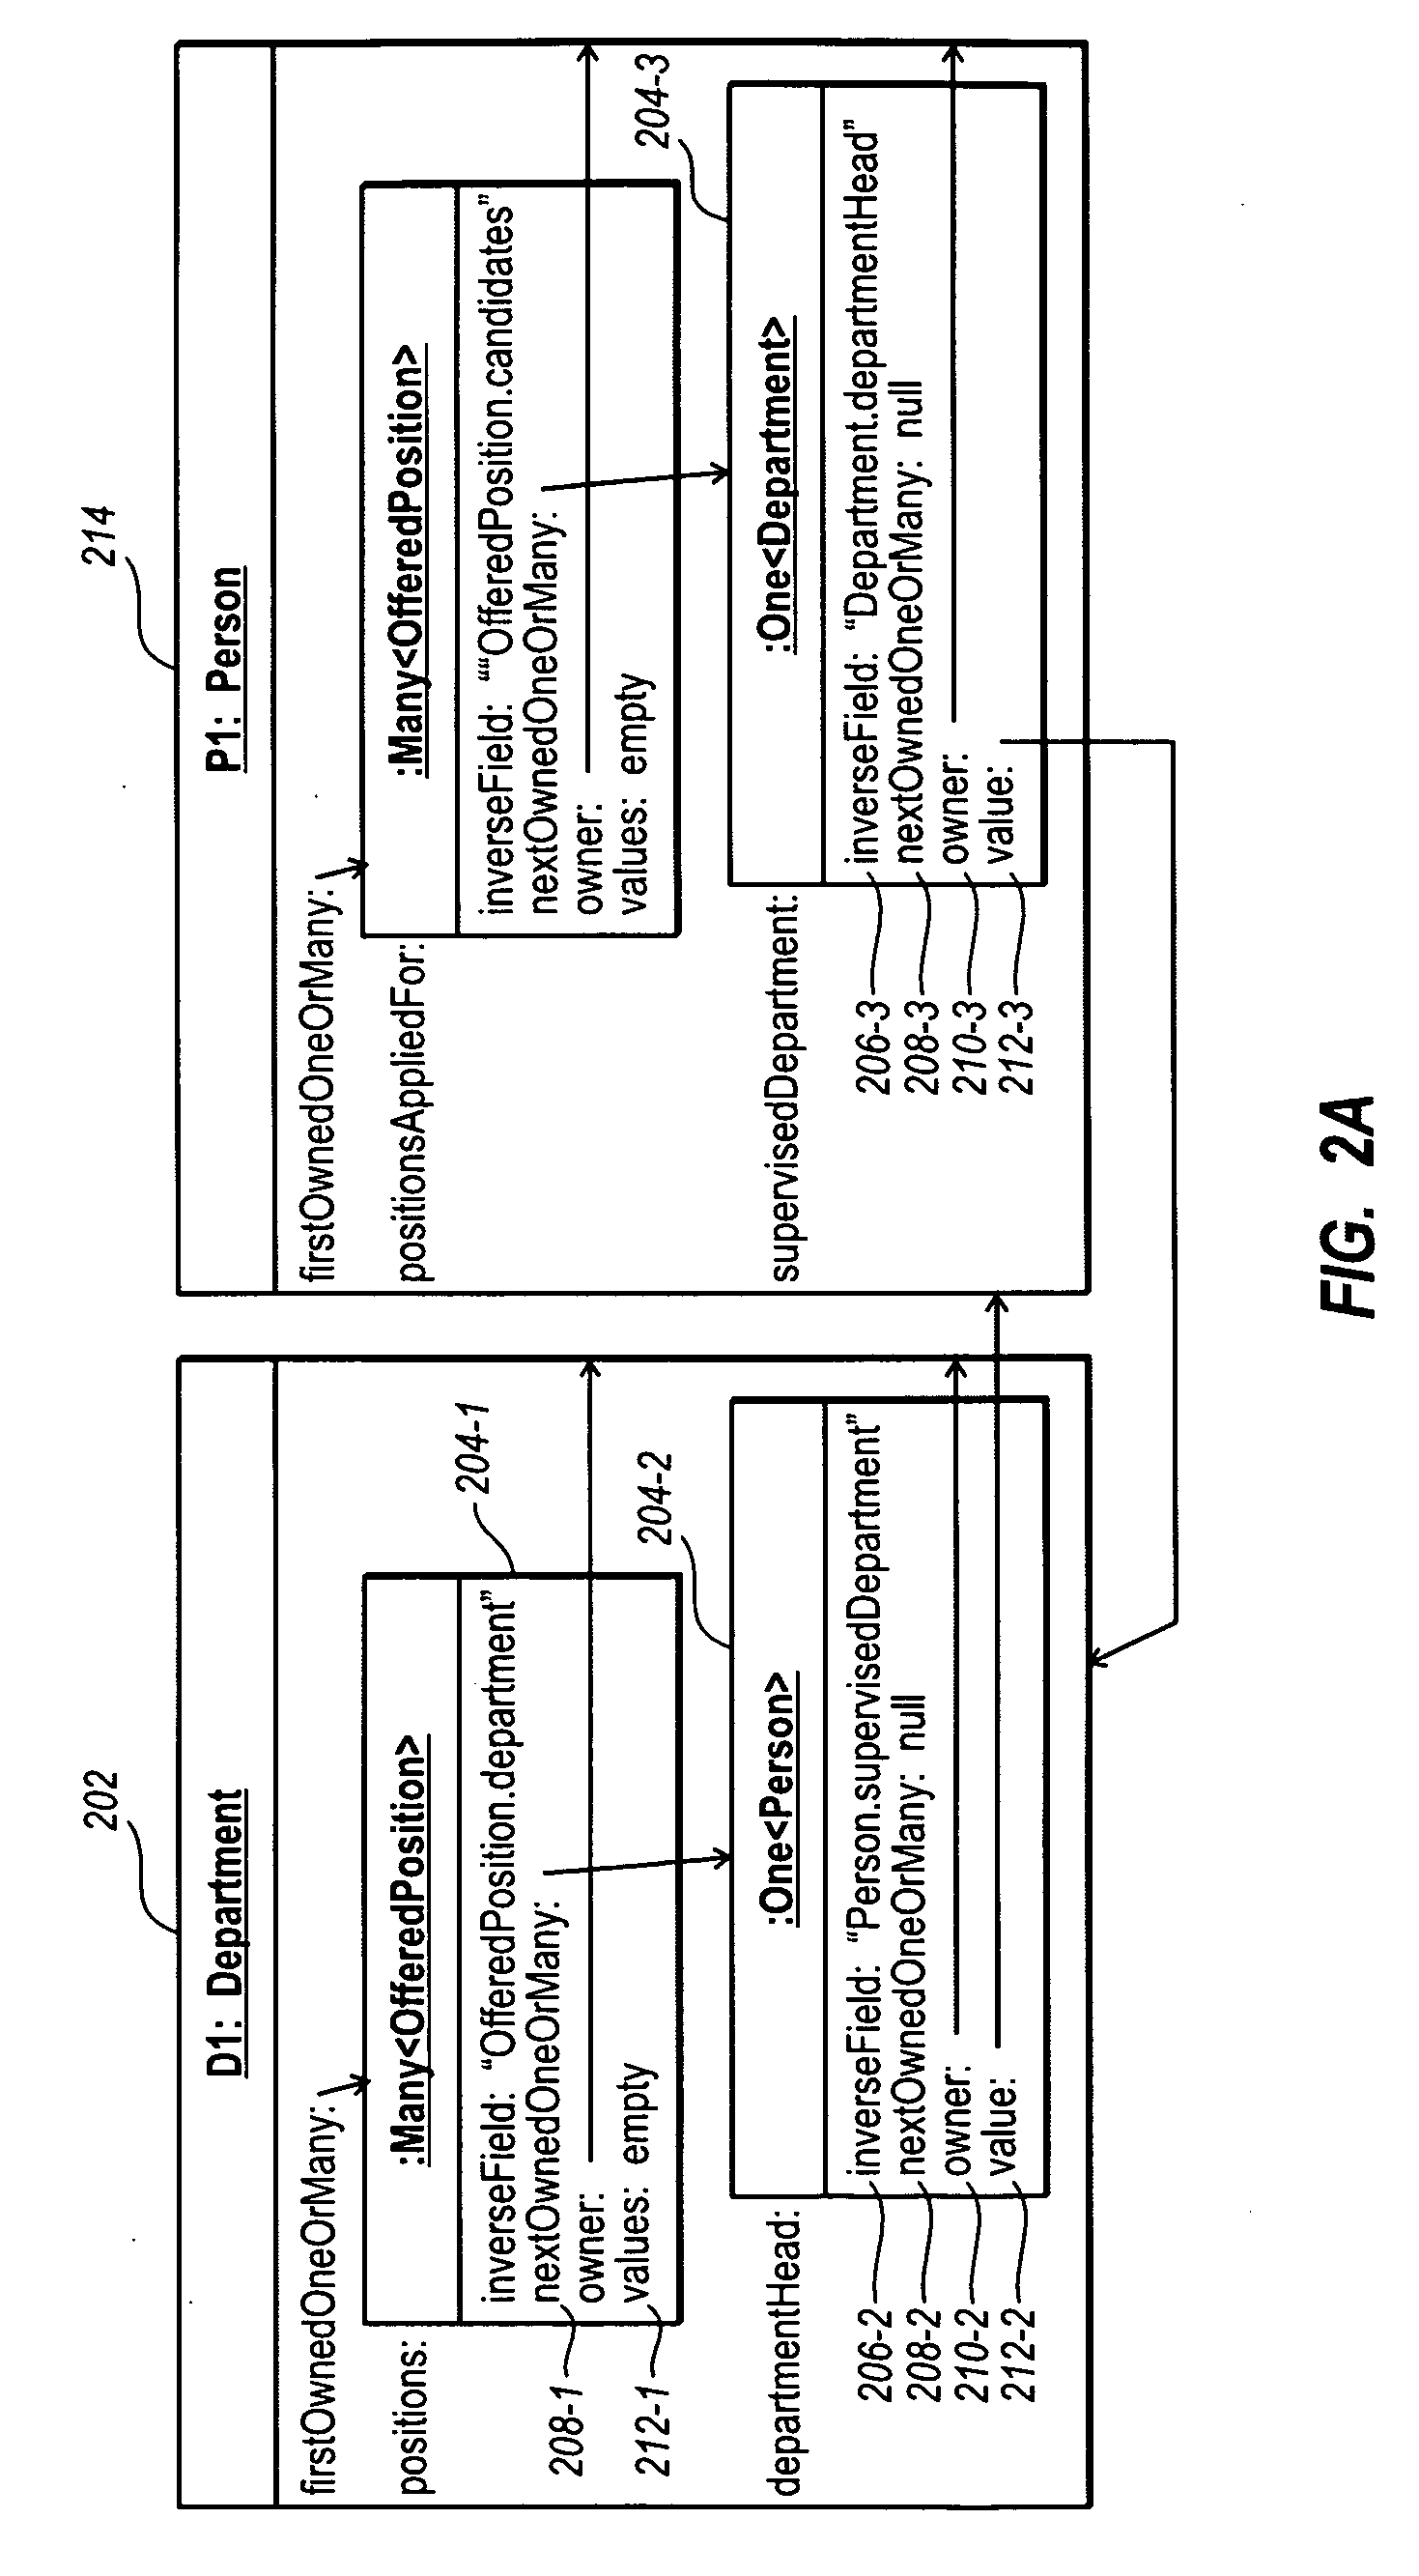 Managing inverse references between objects in object-oriented software